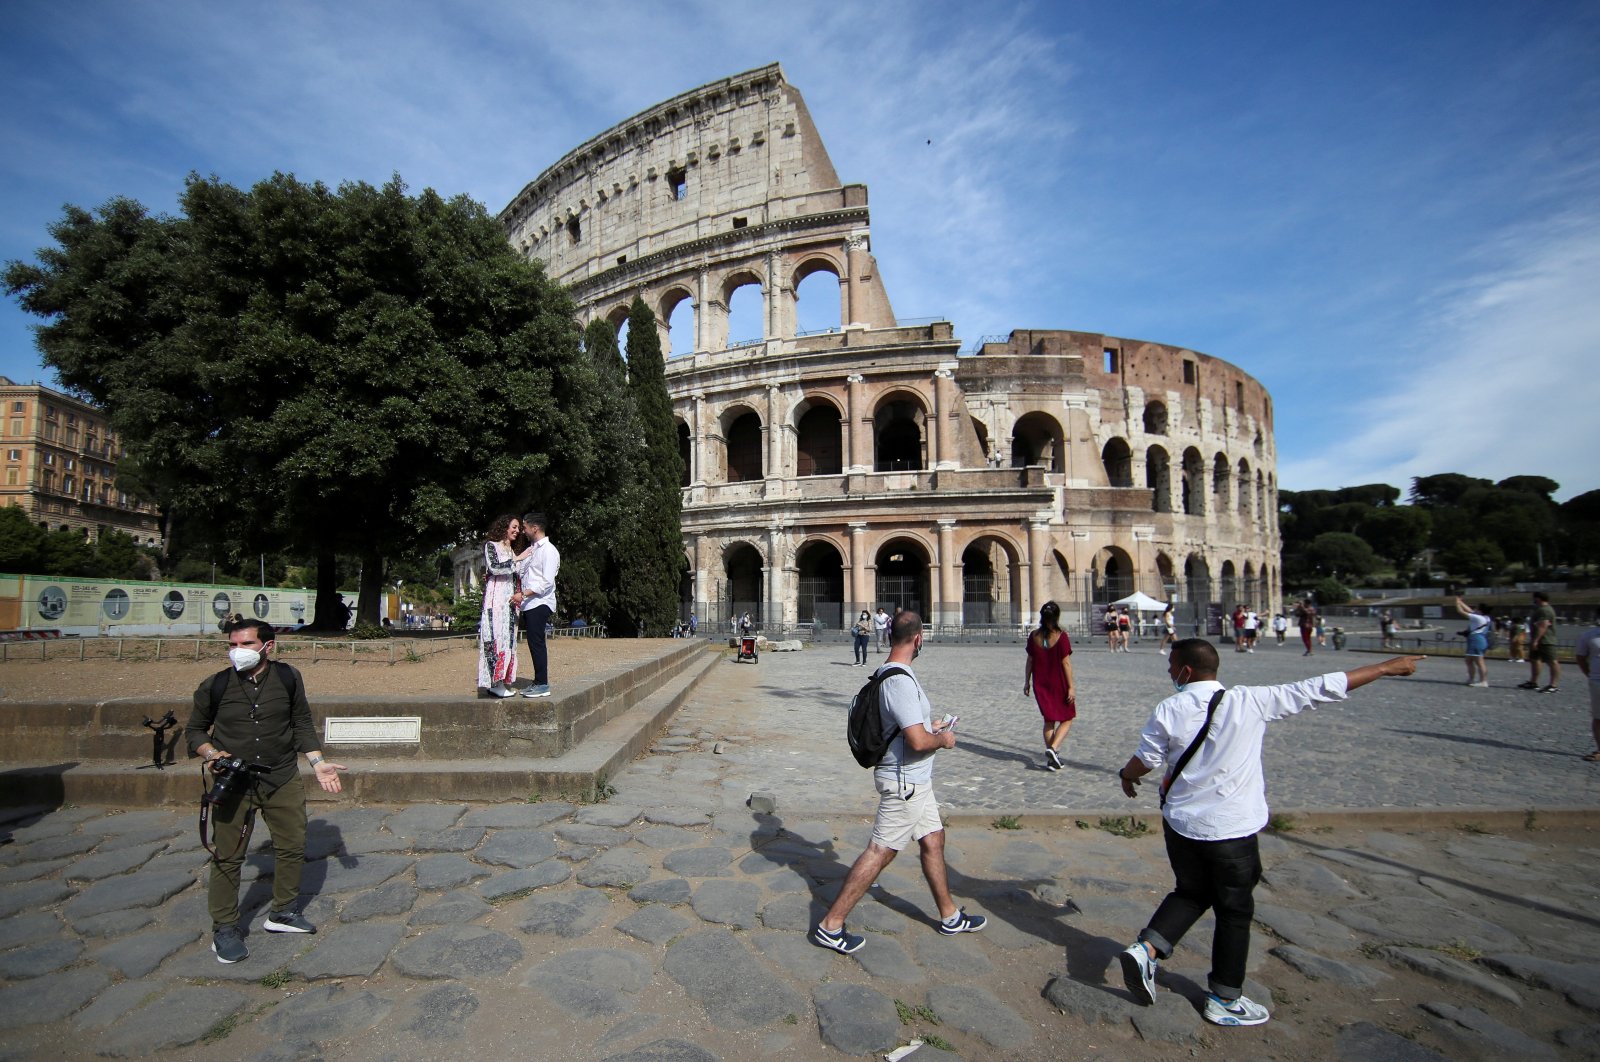 People walk outside the Colosseum, Rome, Italy, June 4, 2021. (Reuters Photo)